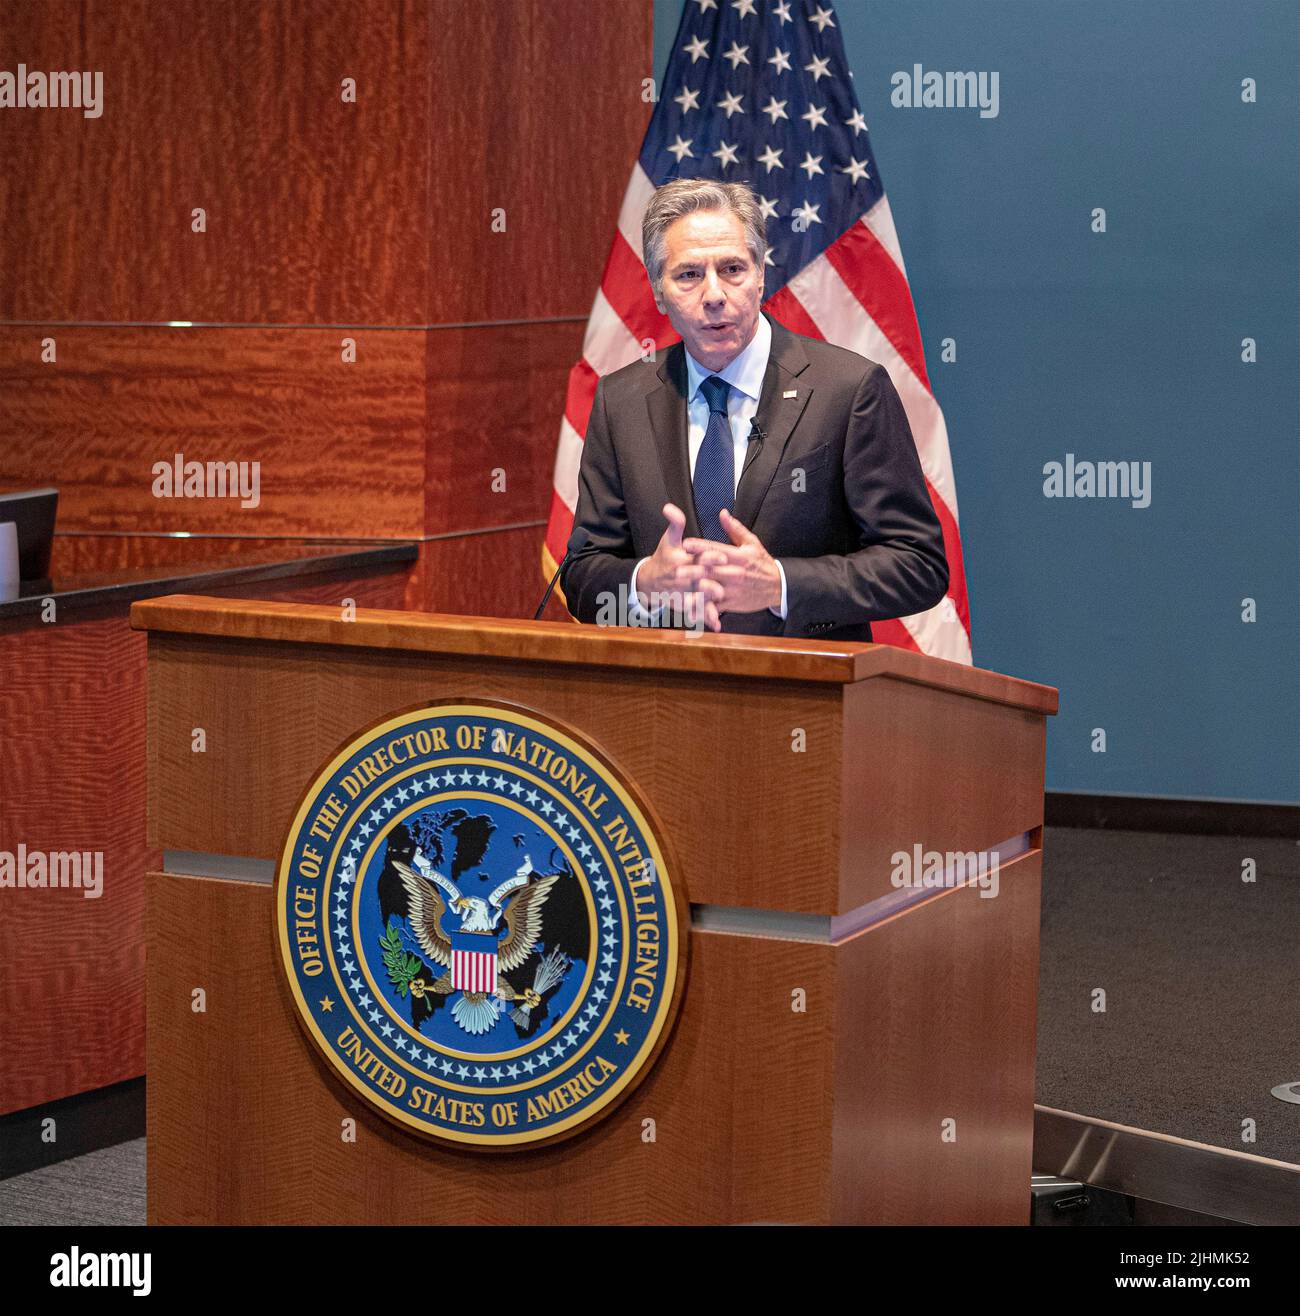 McLean, United States of America. 18 July, 2022. U.S. Secretary of State Antony Blinken, delivers remarks to staff at the Office of National Intelligence, July 18, 2022 in McLean, Virginia. Credit: Freddie Everett/State Department/Alamy Live News Stock Photo